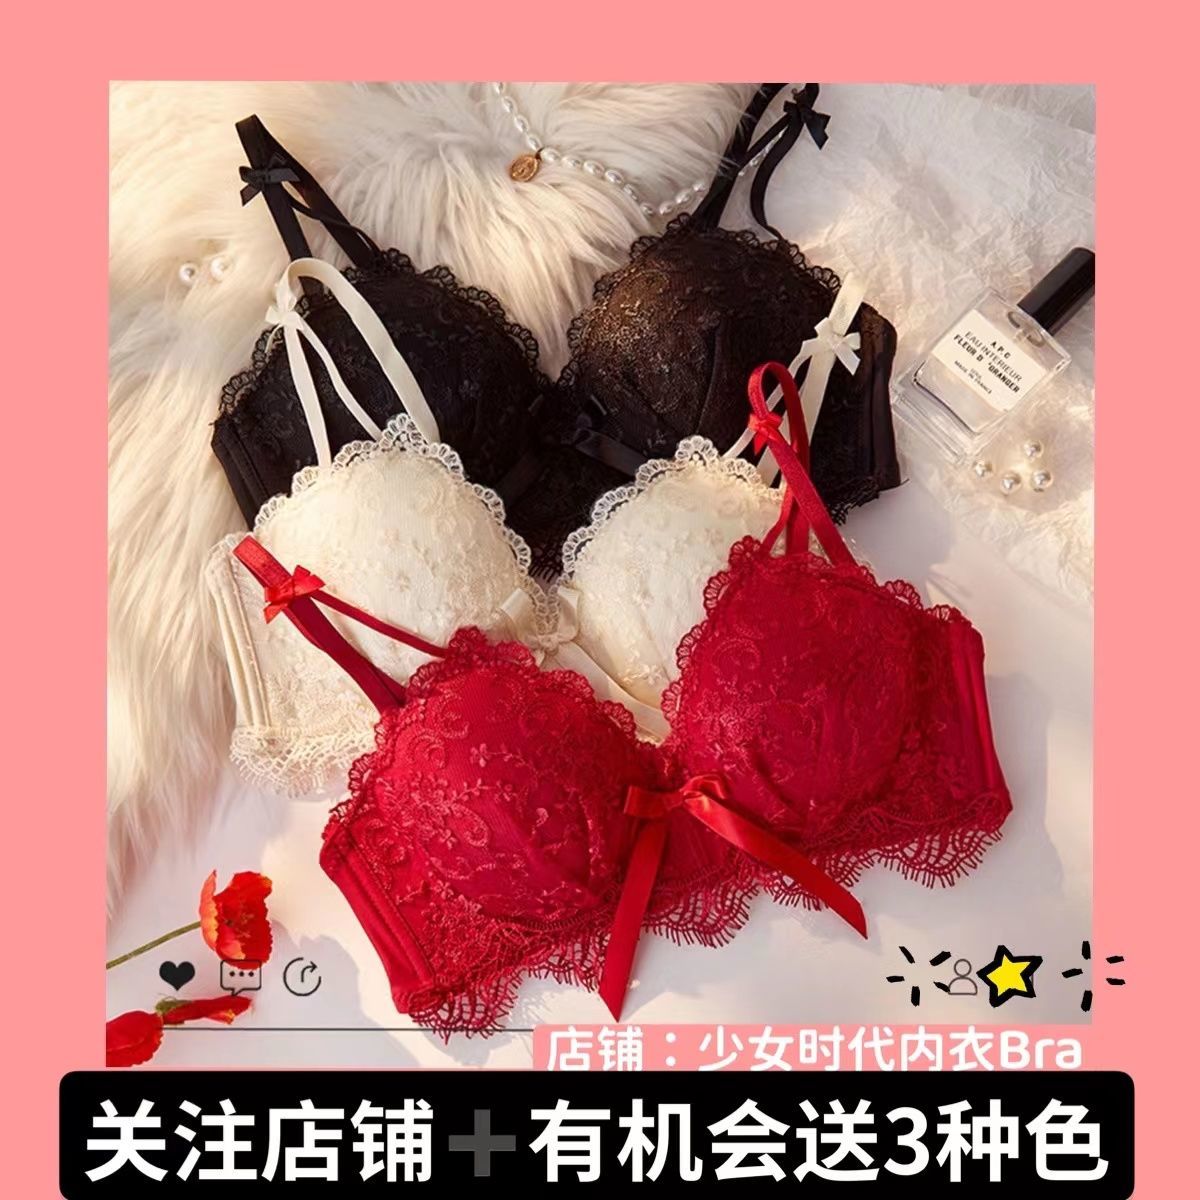 Sexy underwear small chest gathered anti-sagging no steel ring girl lace bra Japanese style pure desire wind bow bra